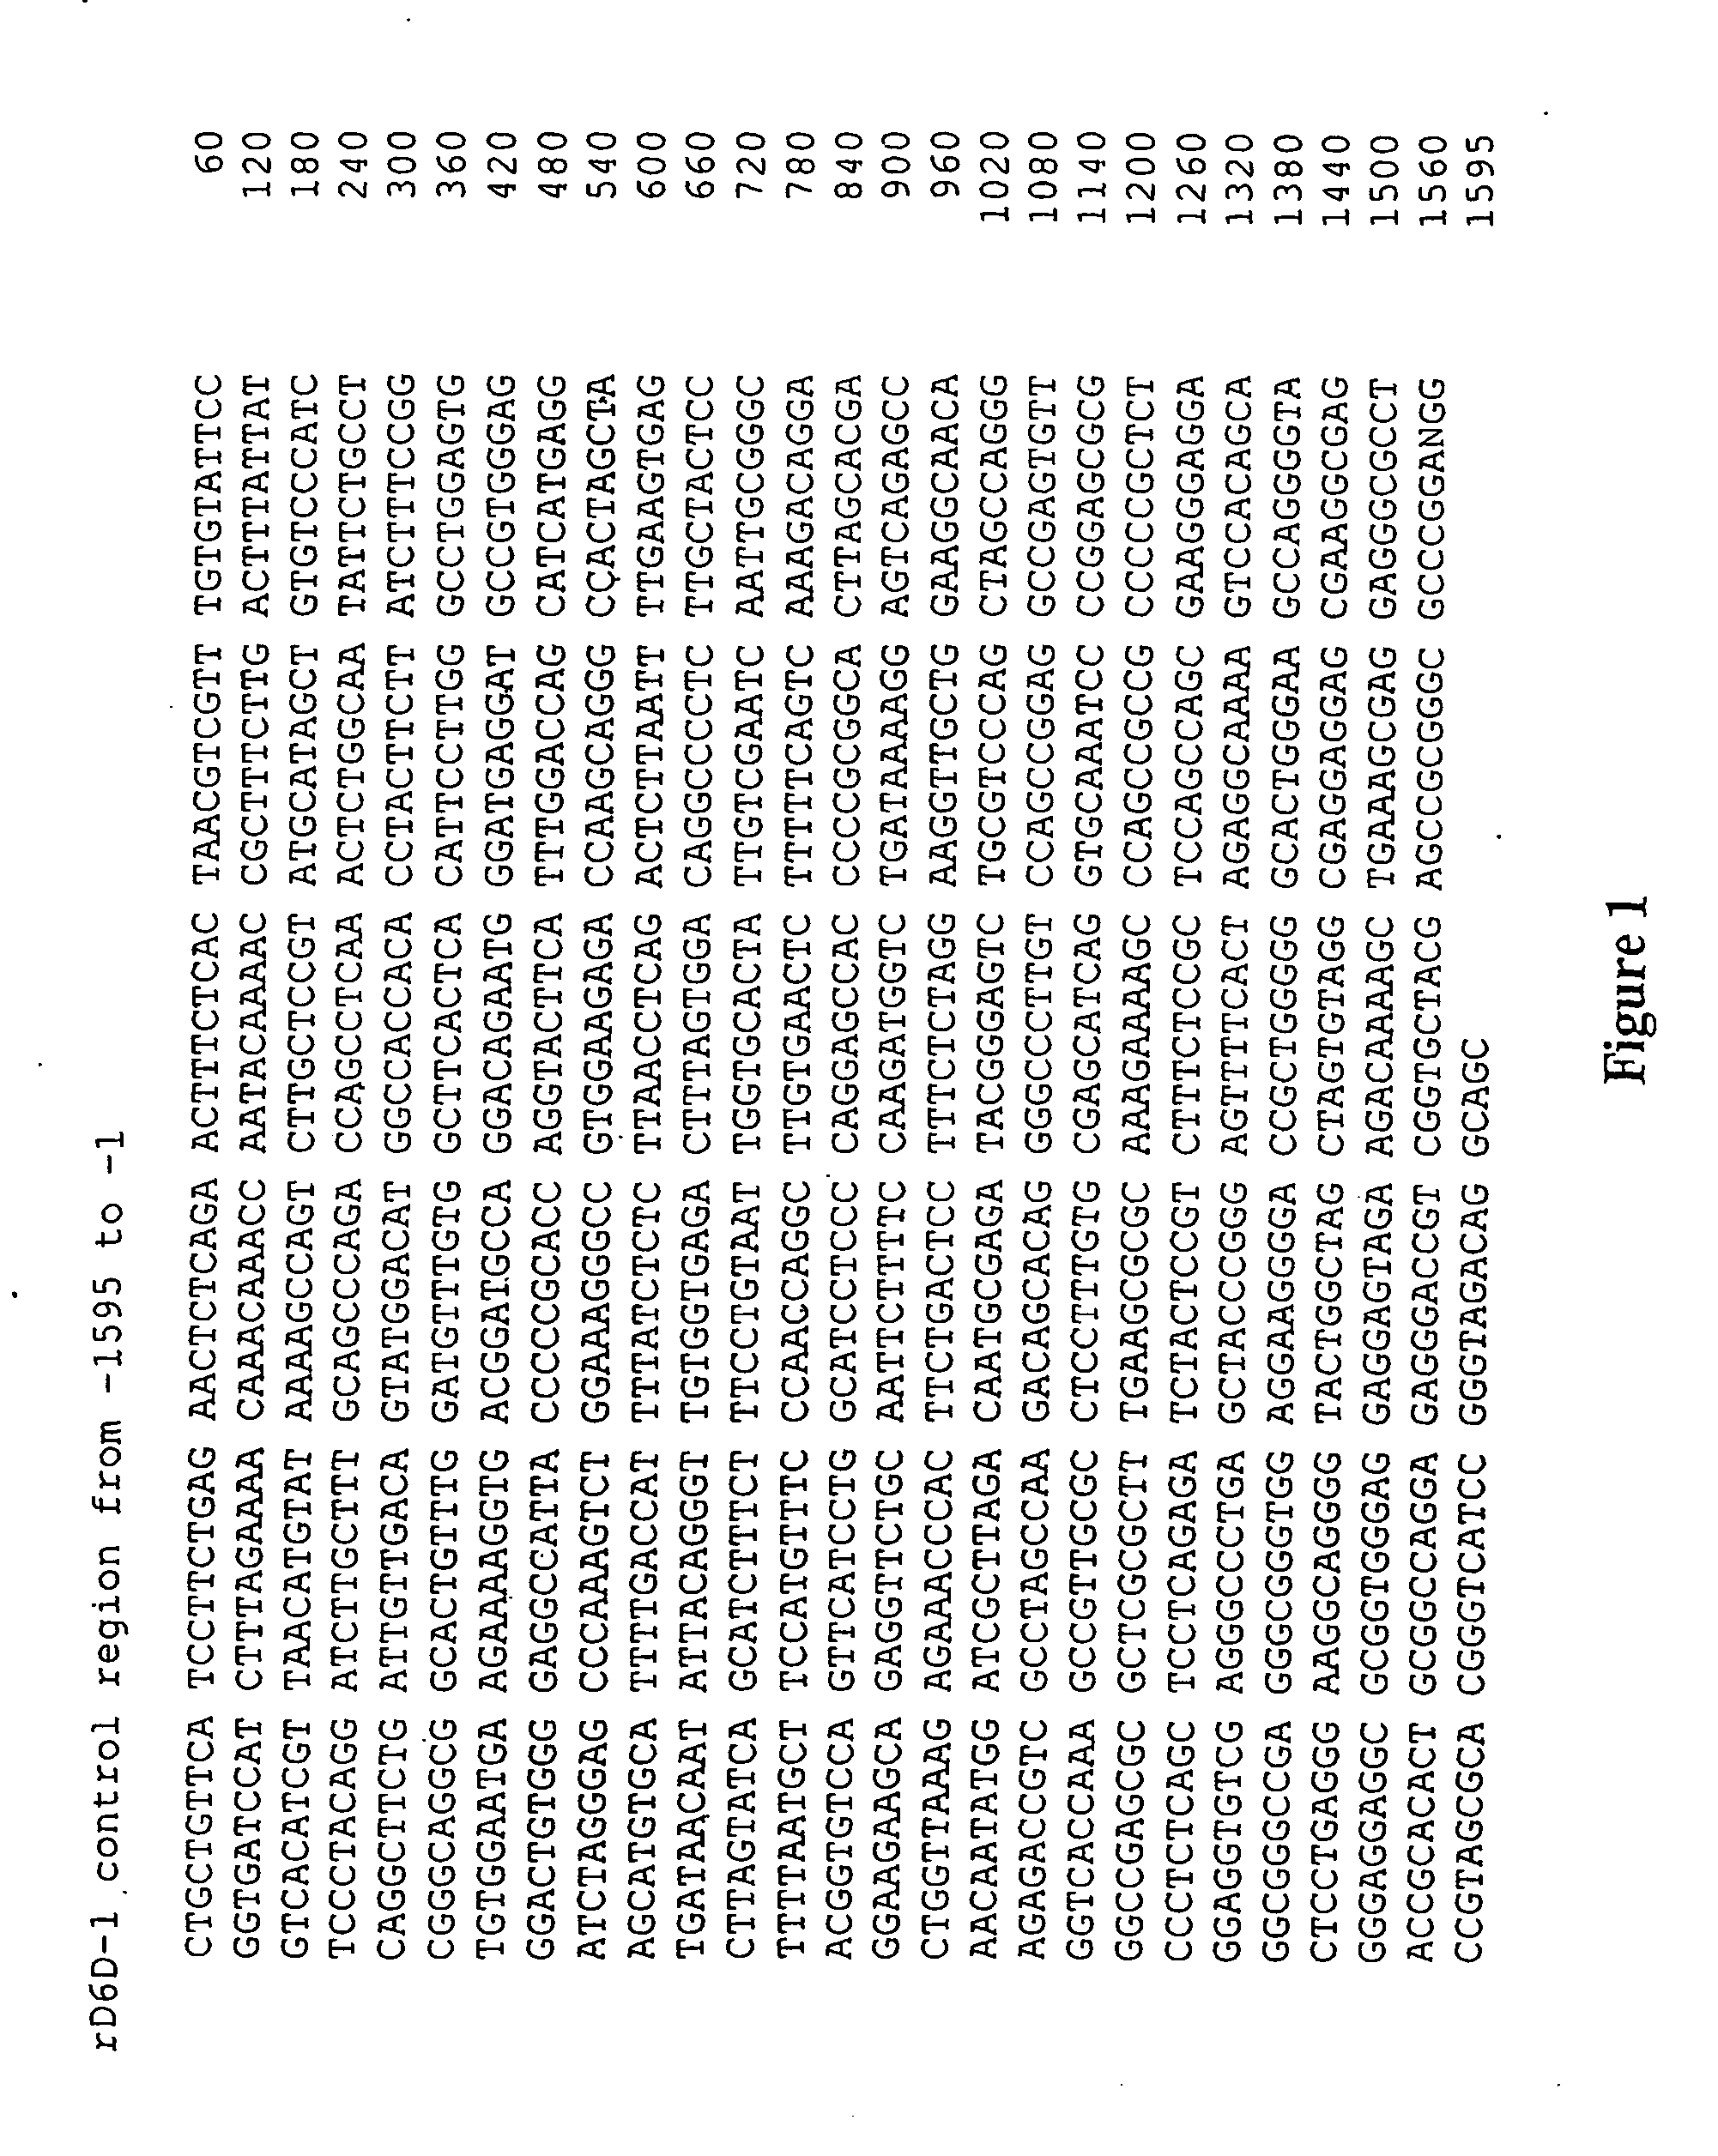 Polynucletides that control delta-6 desaturase genes and methods for identifying compounds for modulating delta-6 desaturase